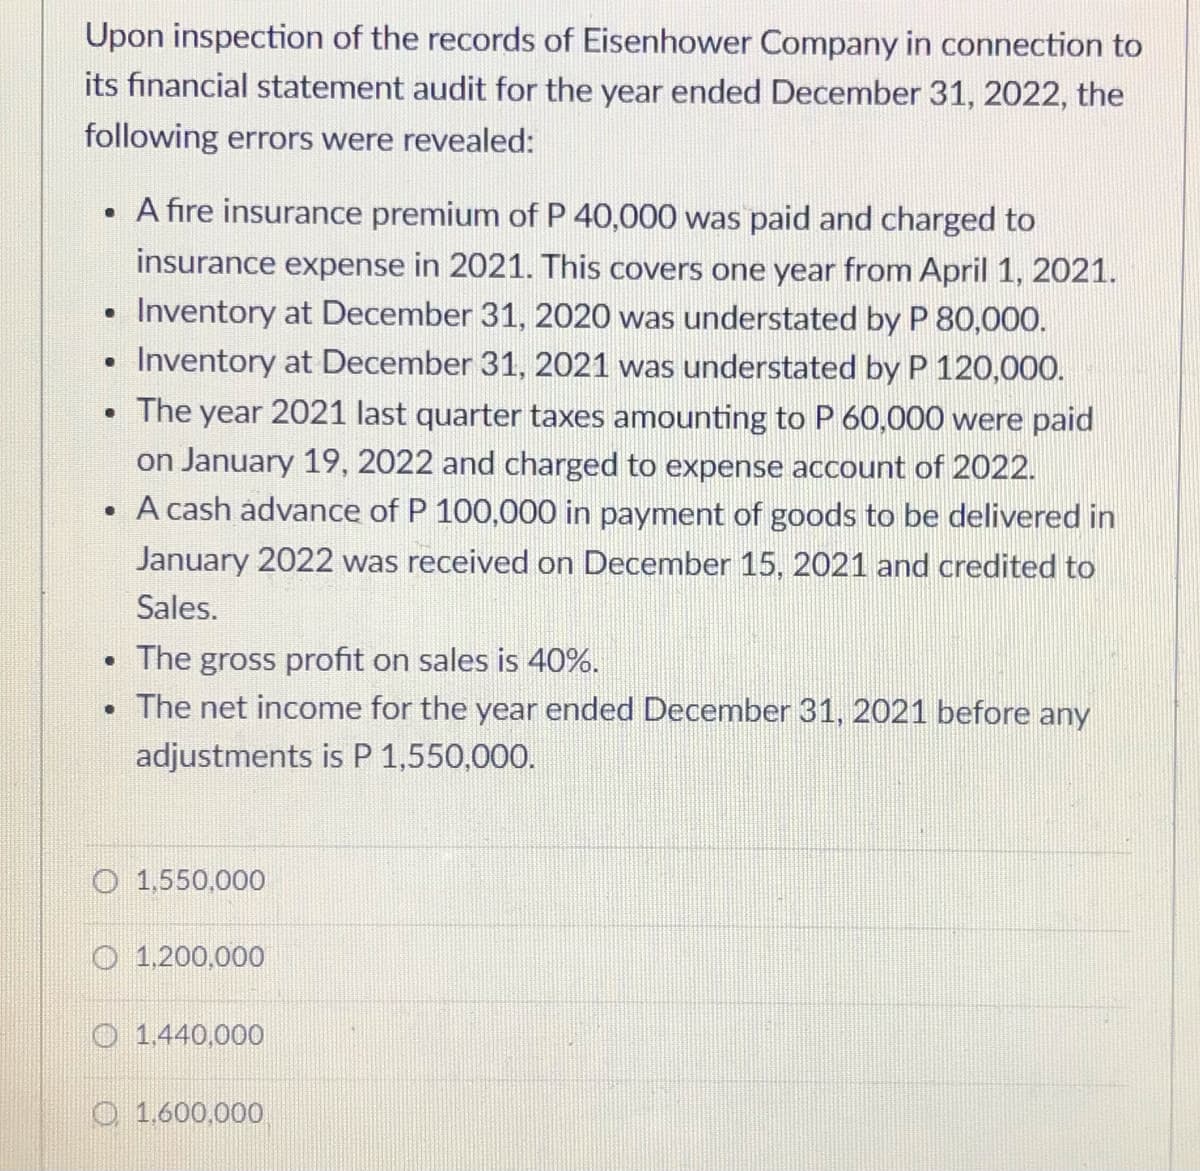 Upon inspection of the records of Eisenhower Company in connection to
its financial statement audit for the year ended December 31, 2022, the
following errors were revealed:
A fire insurance premium of P 40,000 was paid and charged to
insurance expense in 2021. This covers one year from April 1, 2021.
Inventory at December 31, 2020 was understated by P 80,000.
Inventory at December 31, 2021 was understated by P 120,000.
• The year 2021 last quarter taxes amounting to P 60,000 were paid
on January 19, 2022 and charged to expense account of 2022.
A cash advance of P 100,000 in payment of goods to be delivered in
January 2022 was received on December 15, 2021 and credited to
Sales.
• The gross profit on sales is 40%.
The net income for the year ended December 31, 2021 before any
adjustments is P 1,550,000.
O 1,550,000
O 1,200,000
O 1.440,000
O 1.600,000
